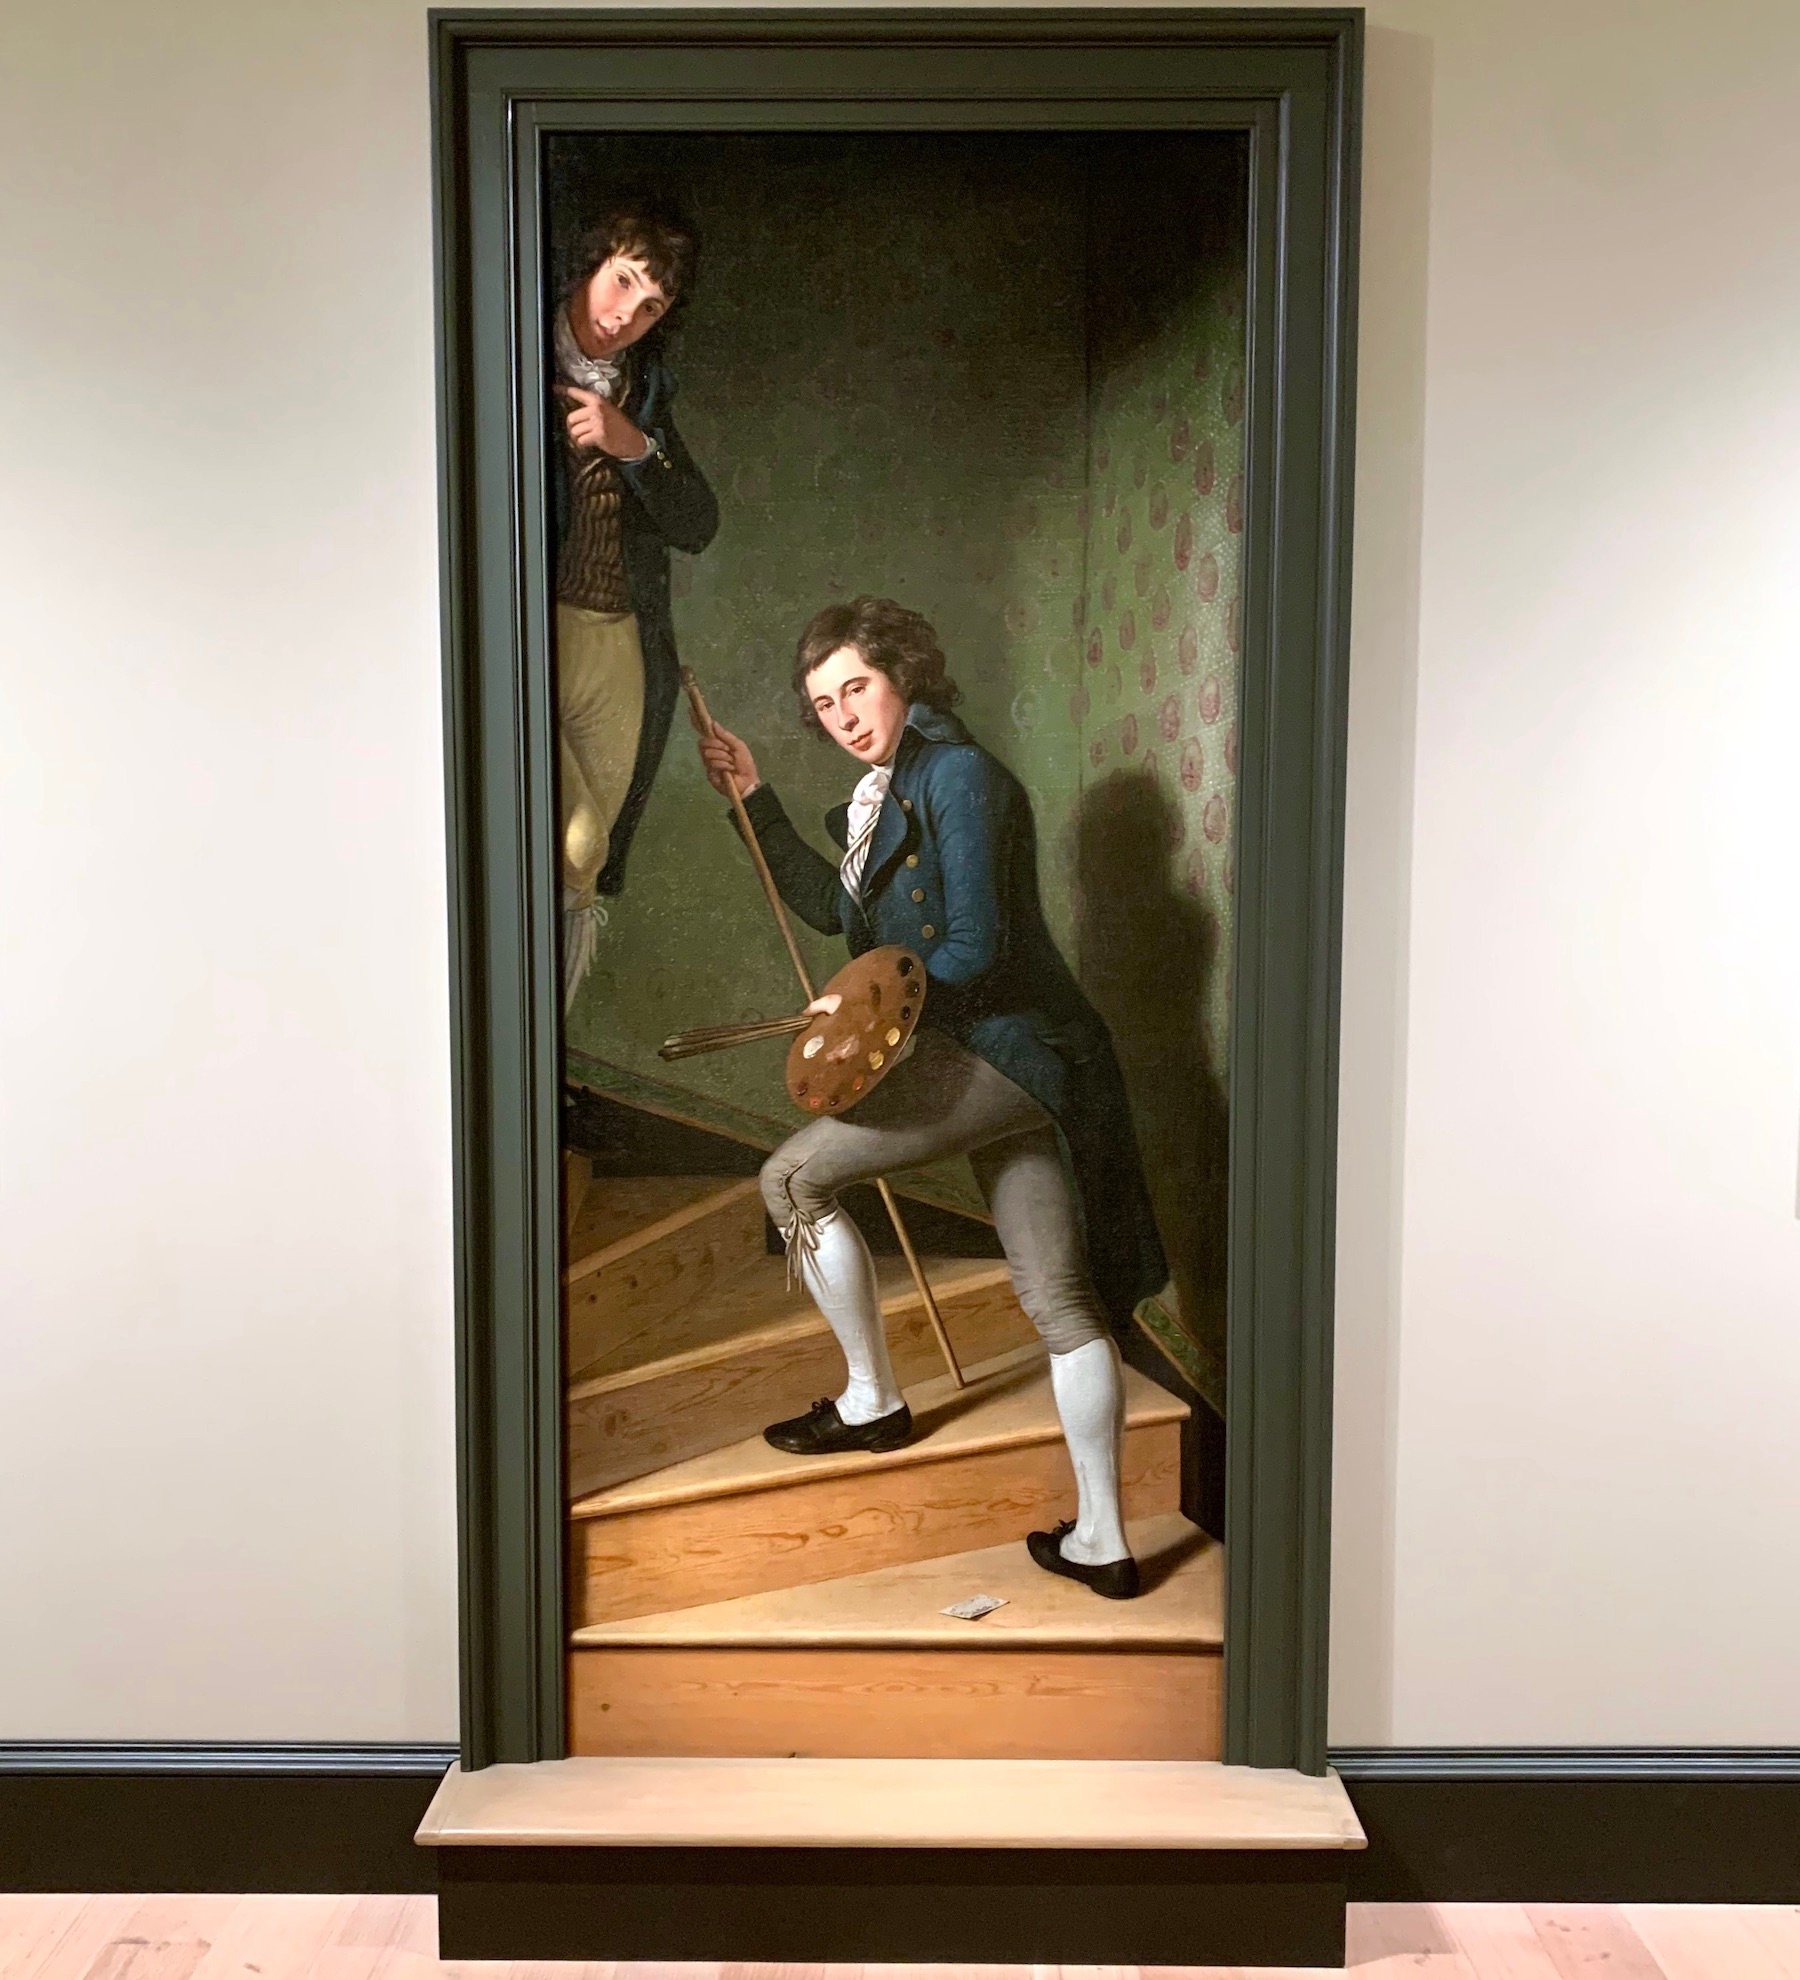 This Delightful Trick Painting Is a Treasure of Early U.S. Art. Here ...